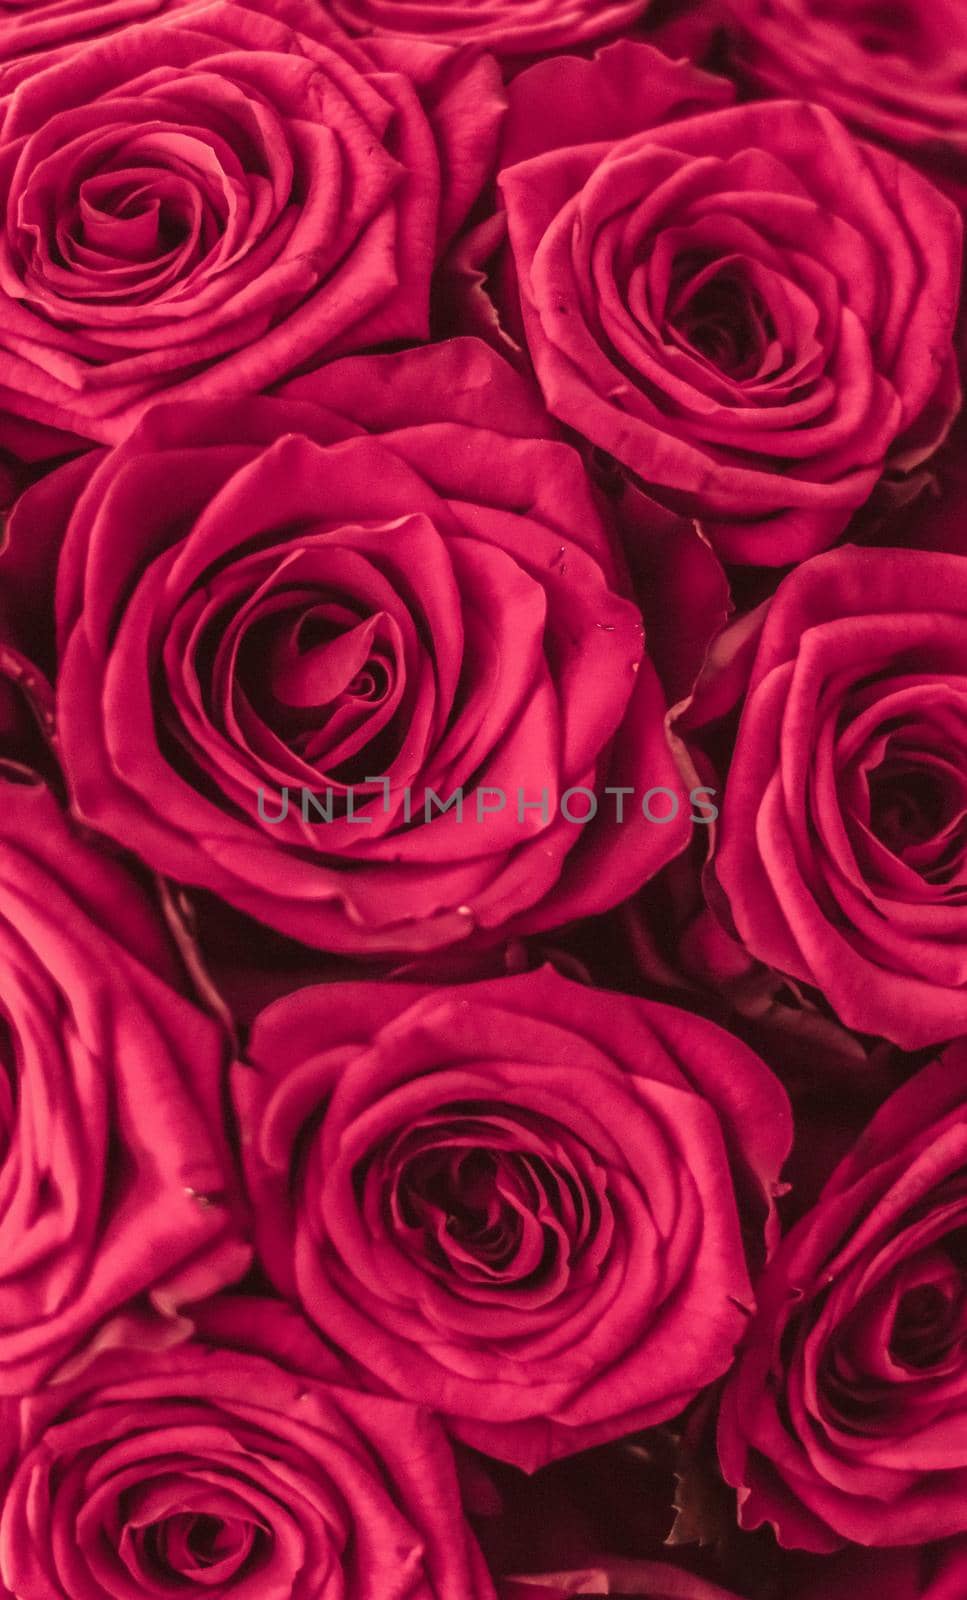 Blooming rose, flower blossom and Valentines Day gift concept - Romantic luxury bouquet of pink roses, flowers in bloom as floral holiday background